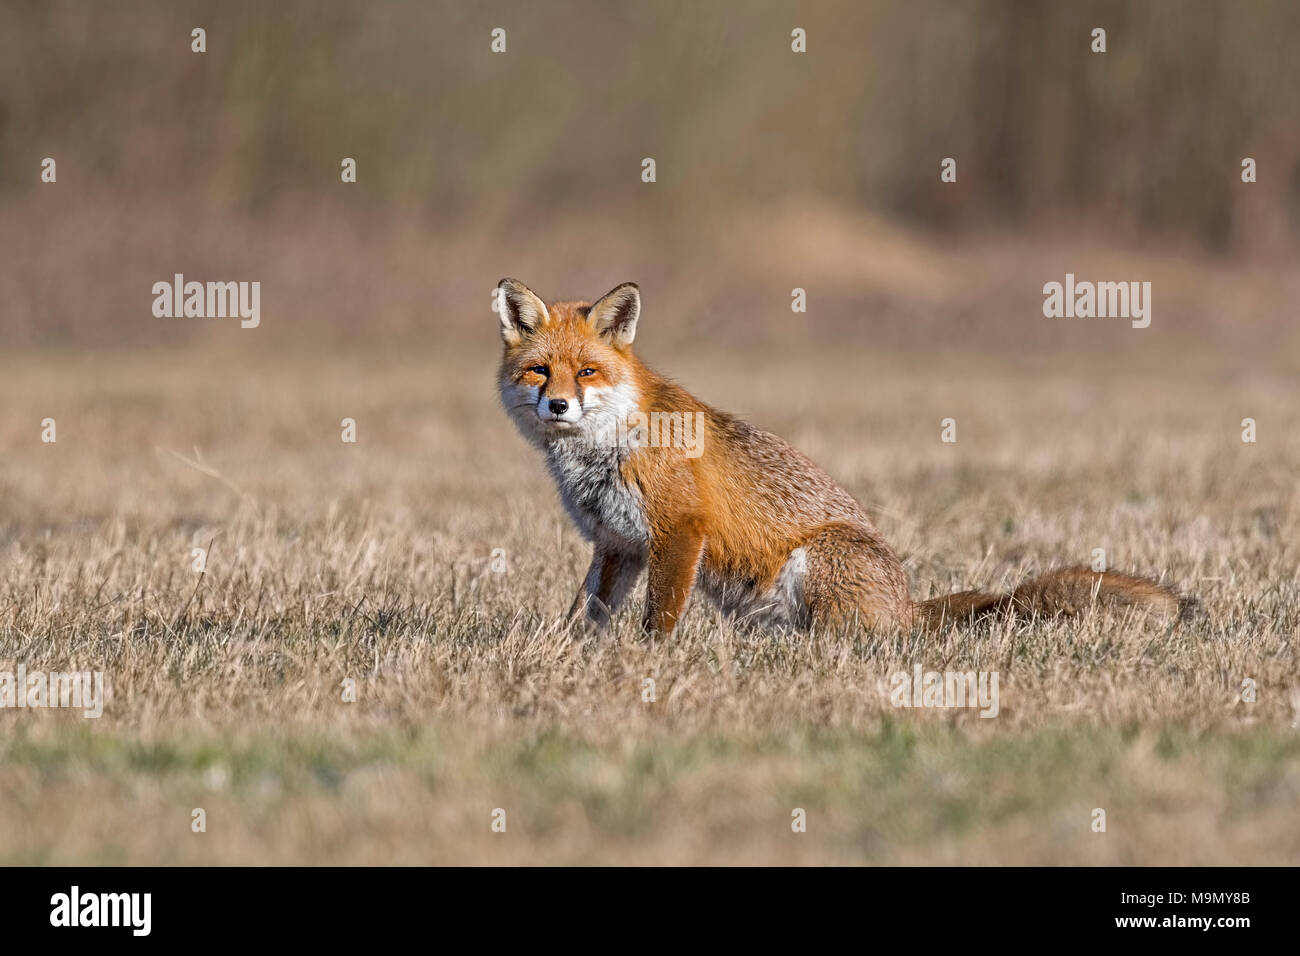 Red fox (Vulpes vulpes) with winter fur, sitting, Biosphere Reserve Mittelelbe, Saxony-Anhalt, Germany Stock Photo